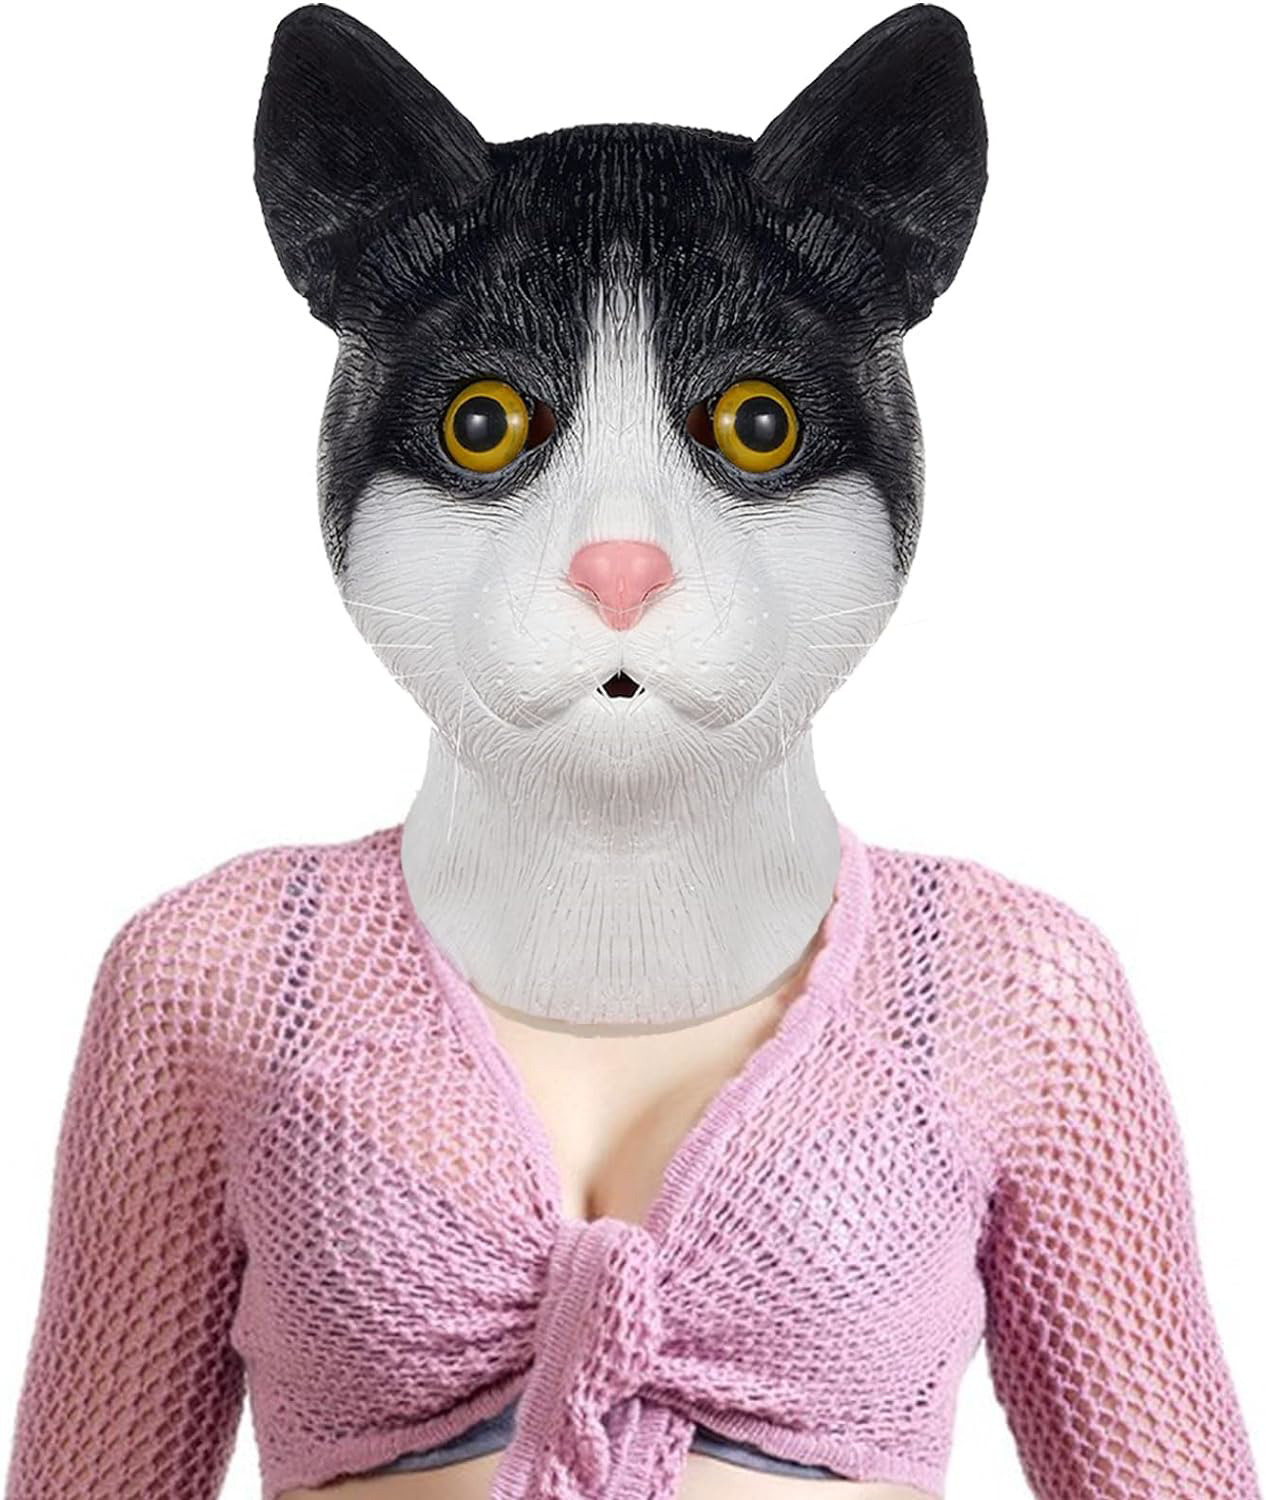 Cute Cat Mask Halloween Costume Party Animal Full Head Cosplay Props Latex Adult